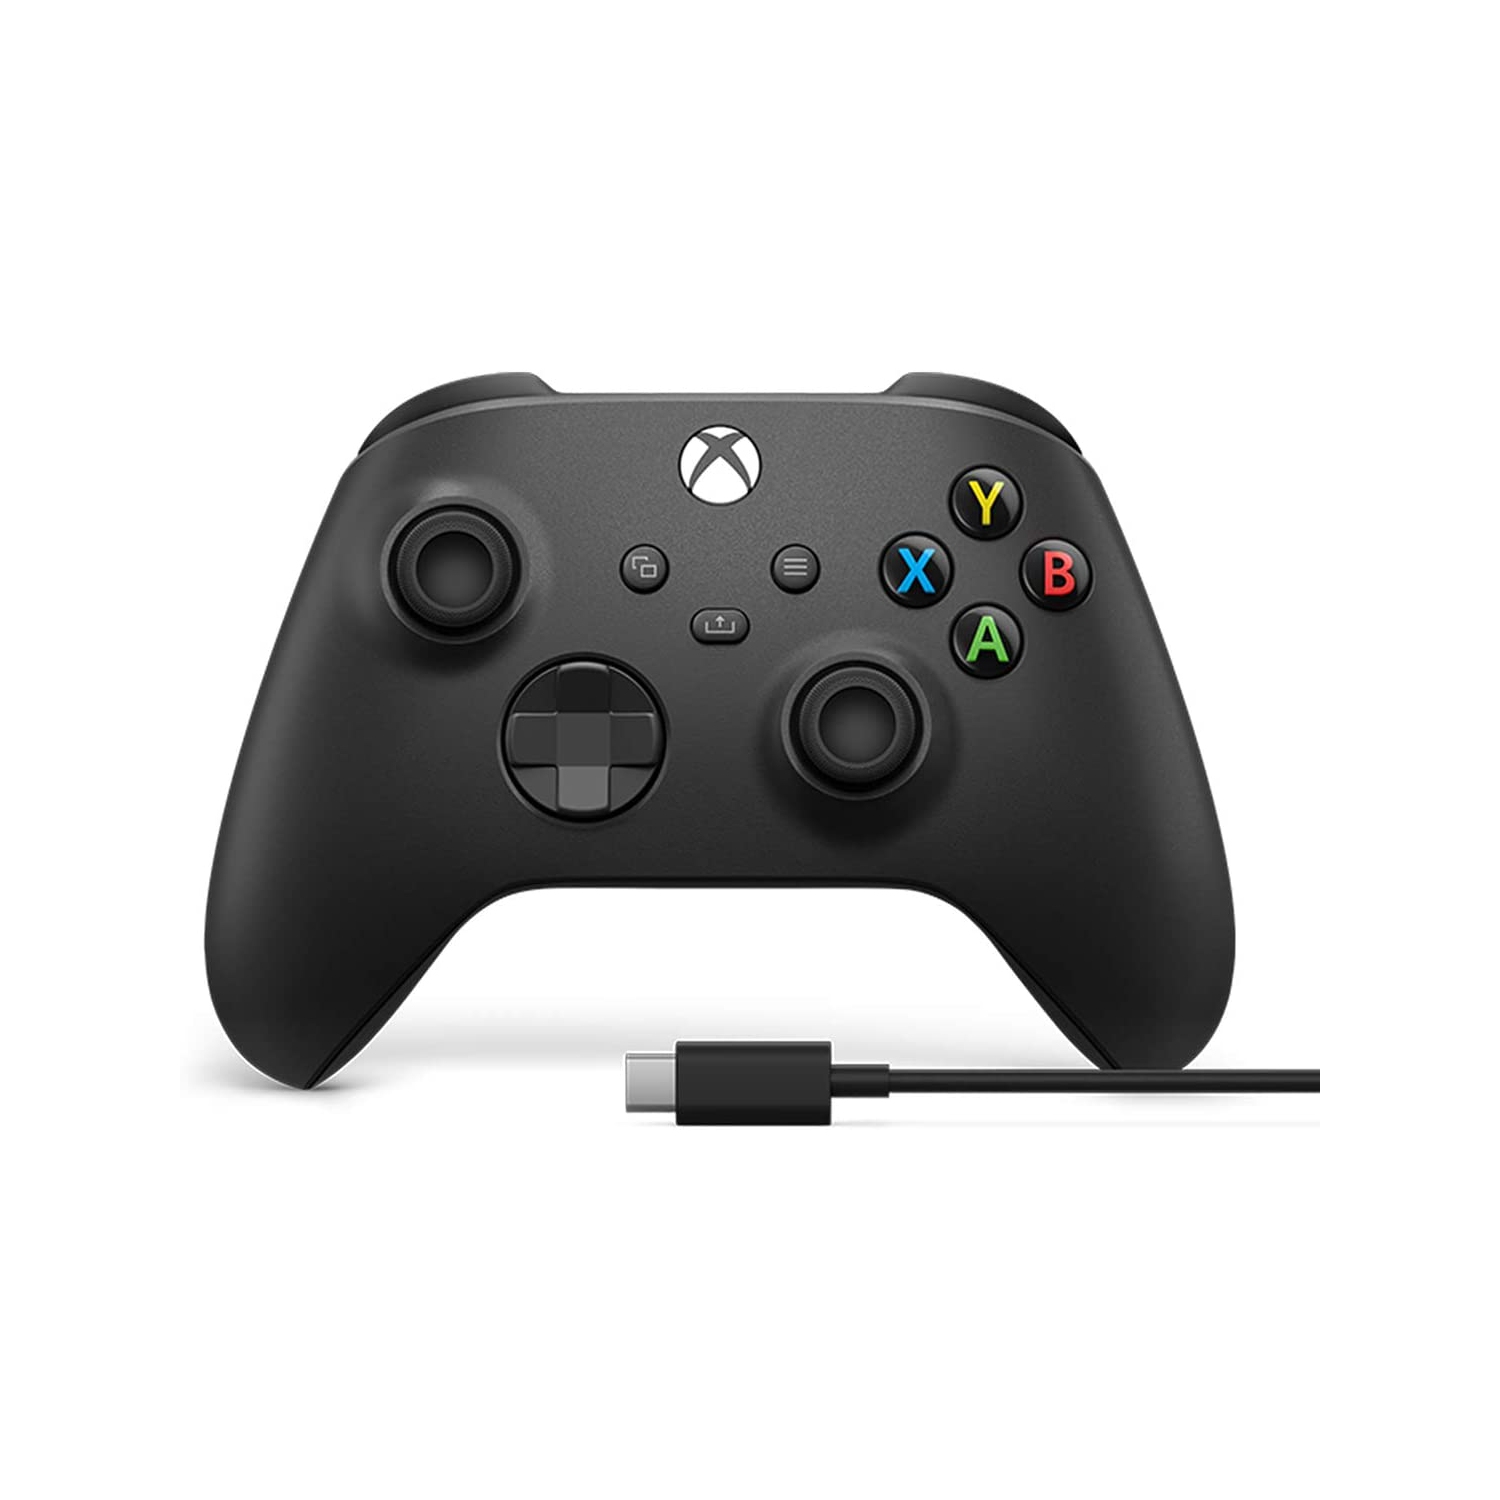 Openbox Xbox Wireless Controller + USB-C Cable for Xbox Series X|S, Xbox One, and Windows Devices, USB-C cable included - Carbon Black